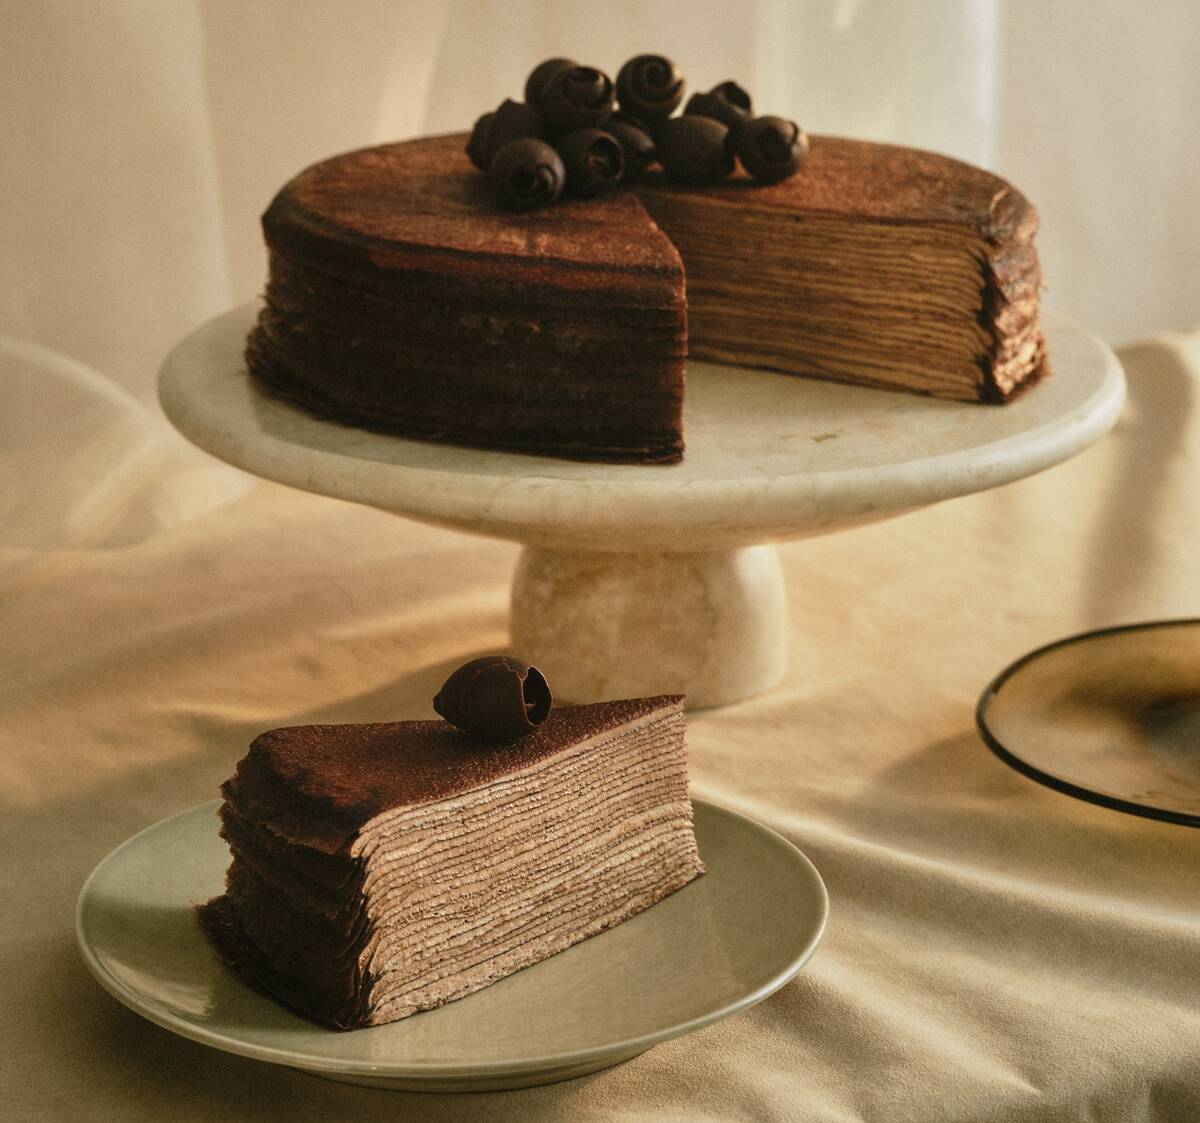 An chocolate mille-crêpes cake from Lady M Confections, a bakery chain with shops across Asia ...